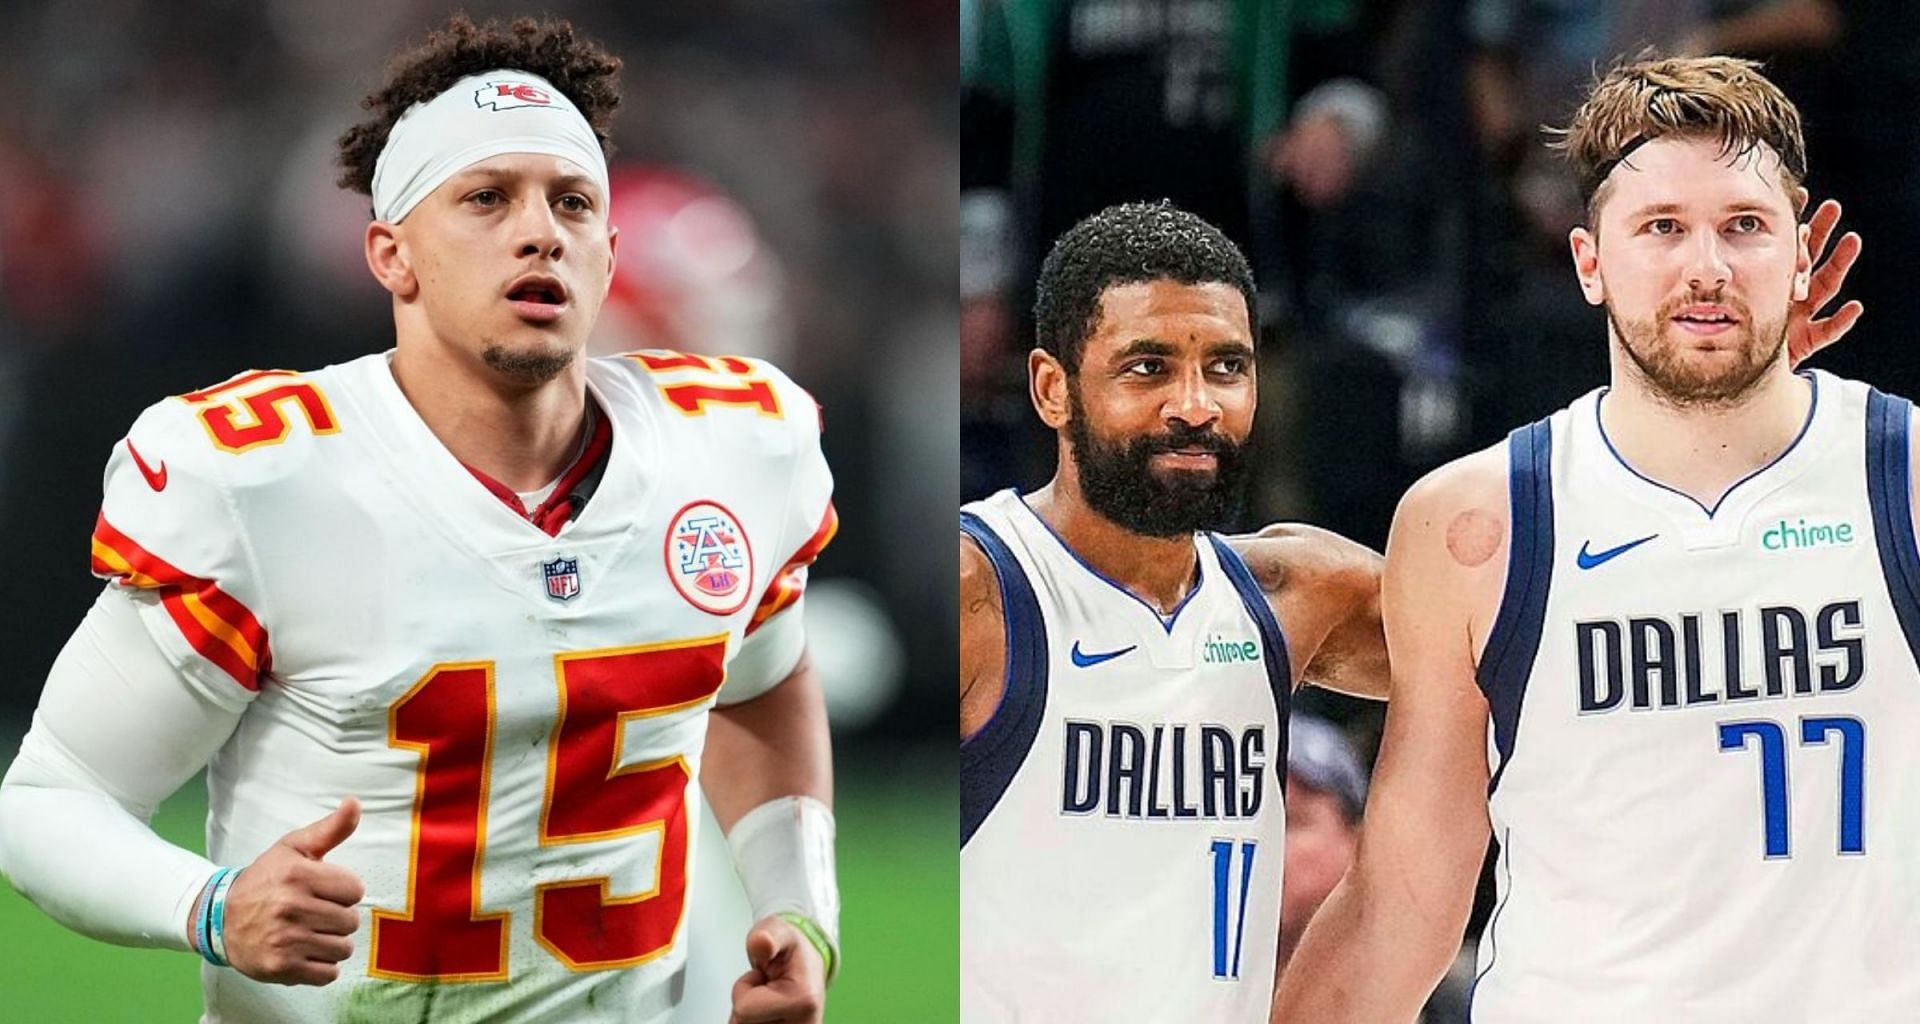 Patrick Mahomes was delighted with the Mavericks